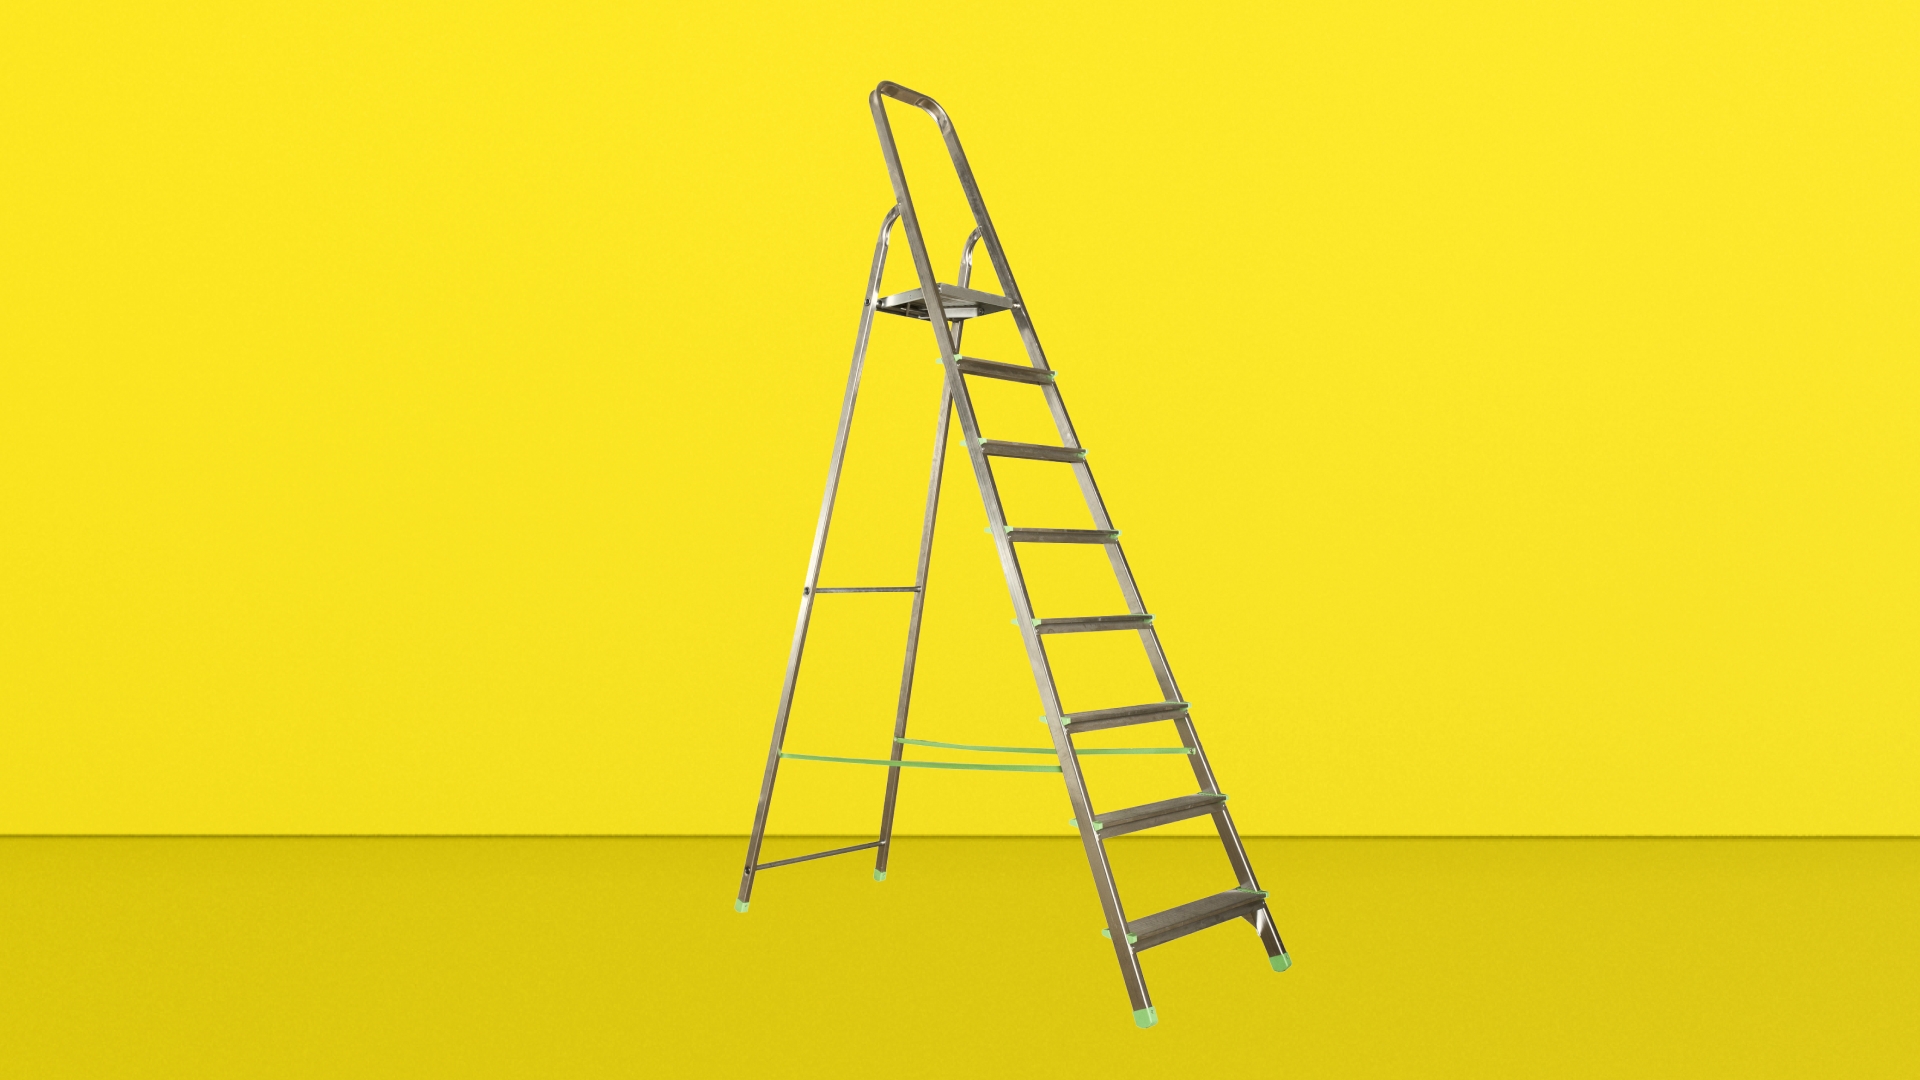 A traditional ladder on a yellow background